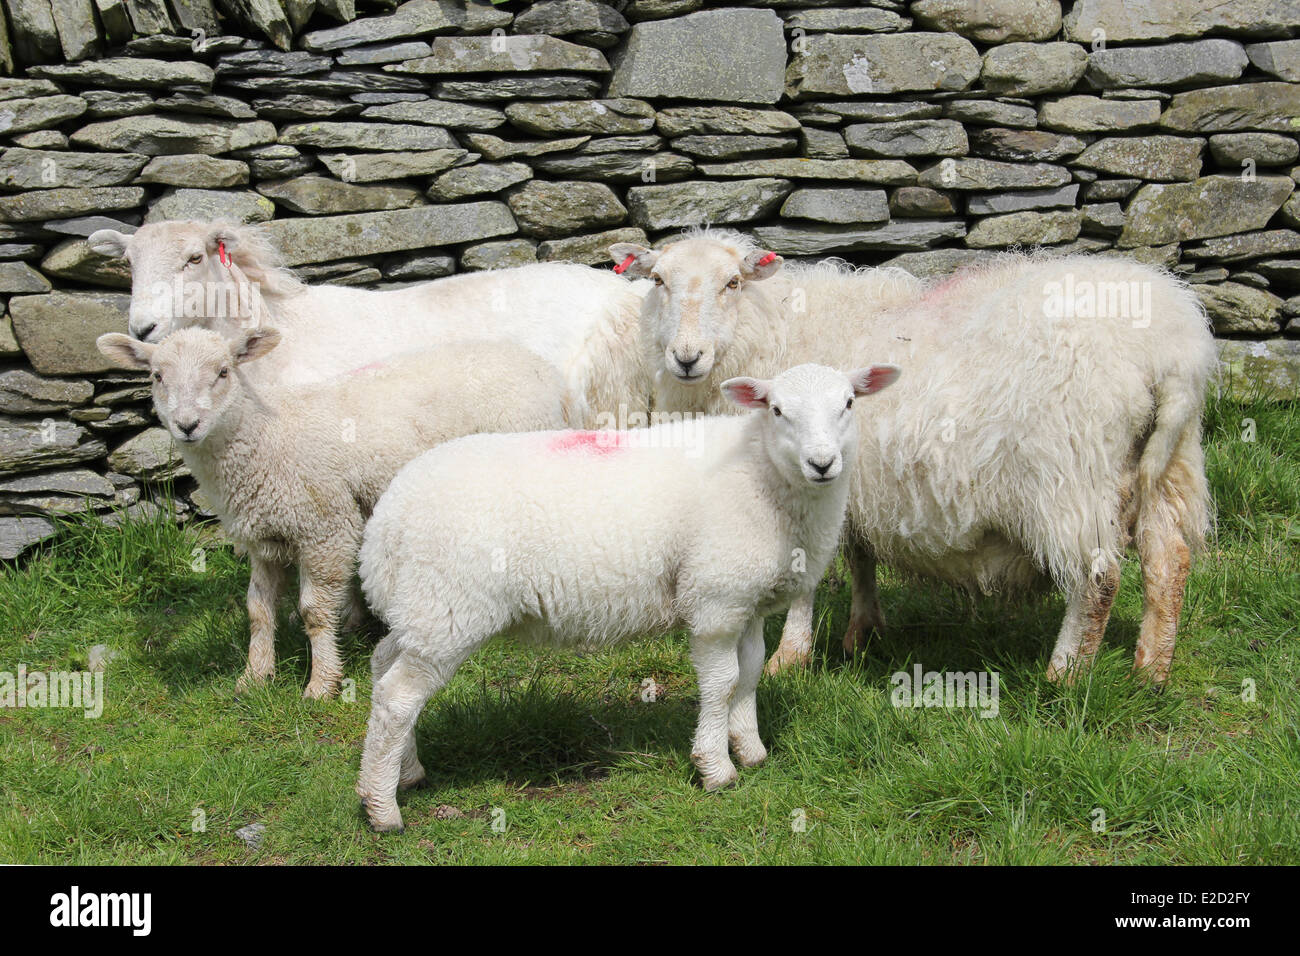 Ewes And Lambs Beside A Stone Wall, Wales Stock Photo